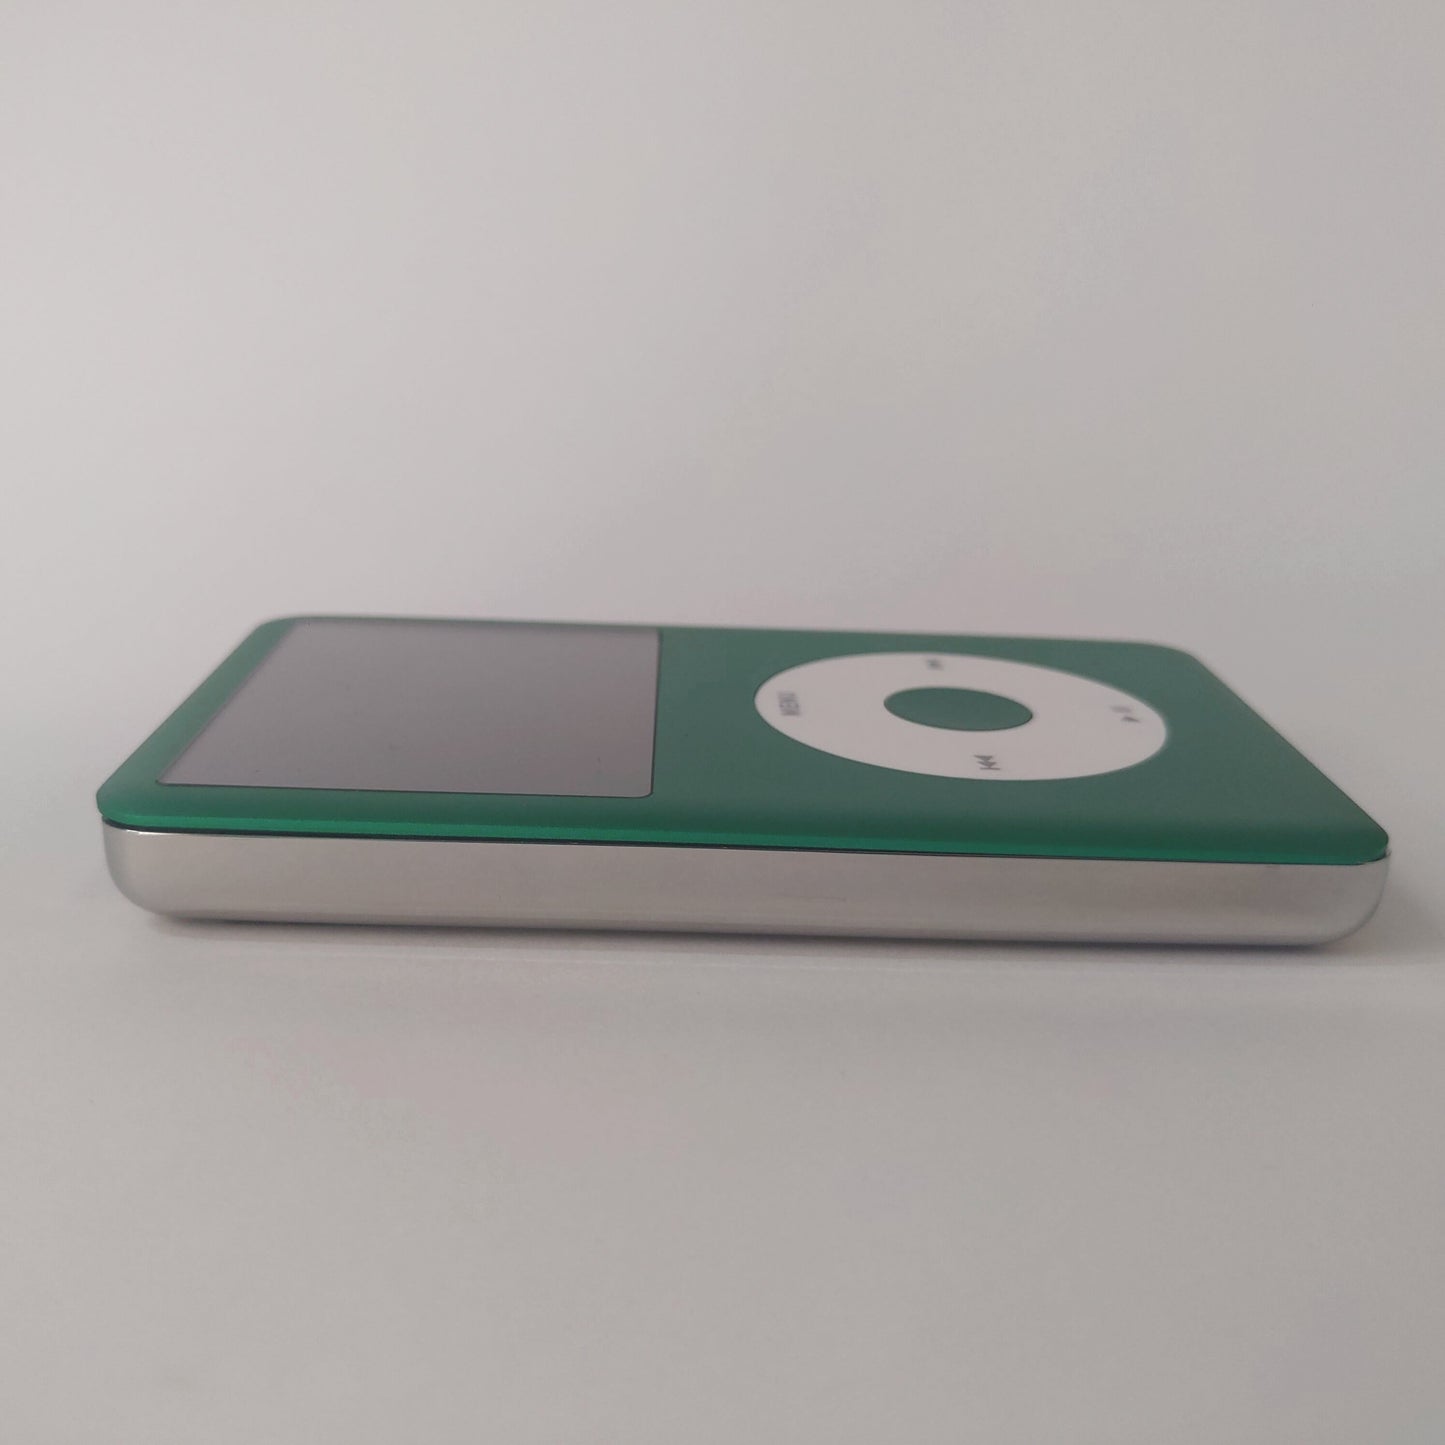 Green iPod classic side view